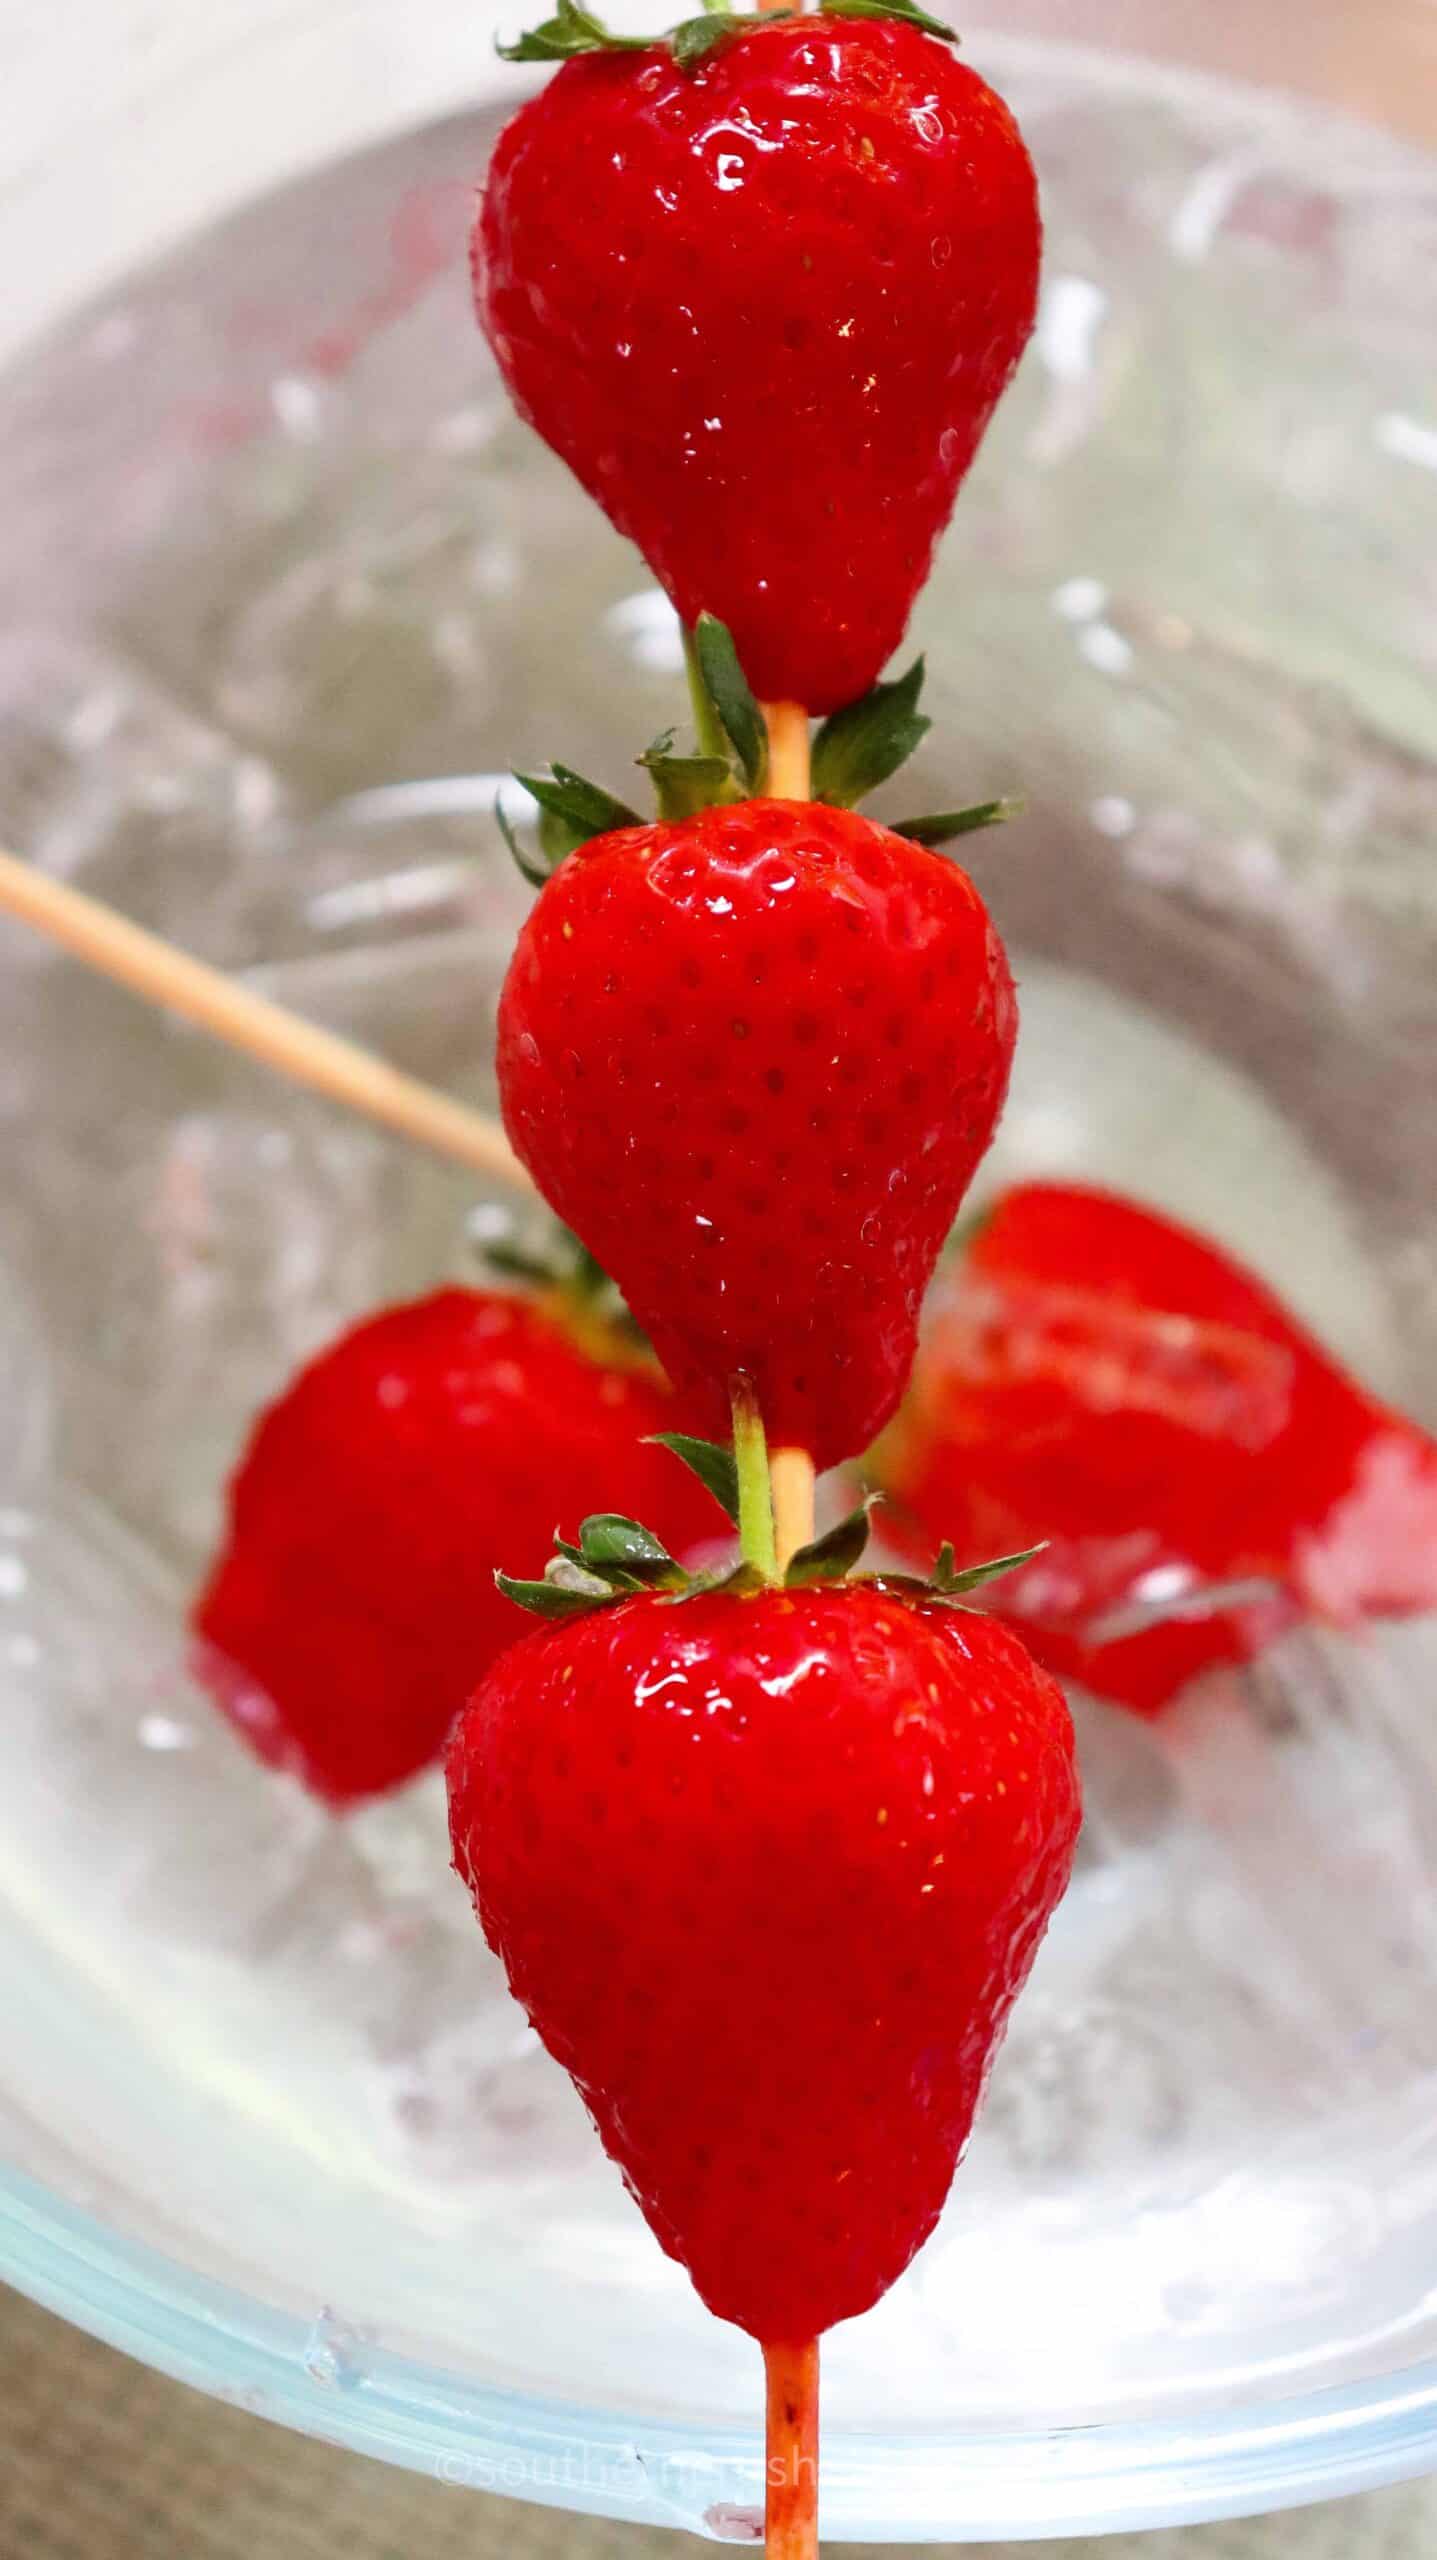 coated strawberries after dipped in ice water bath